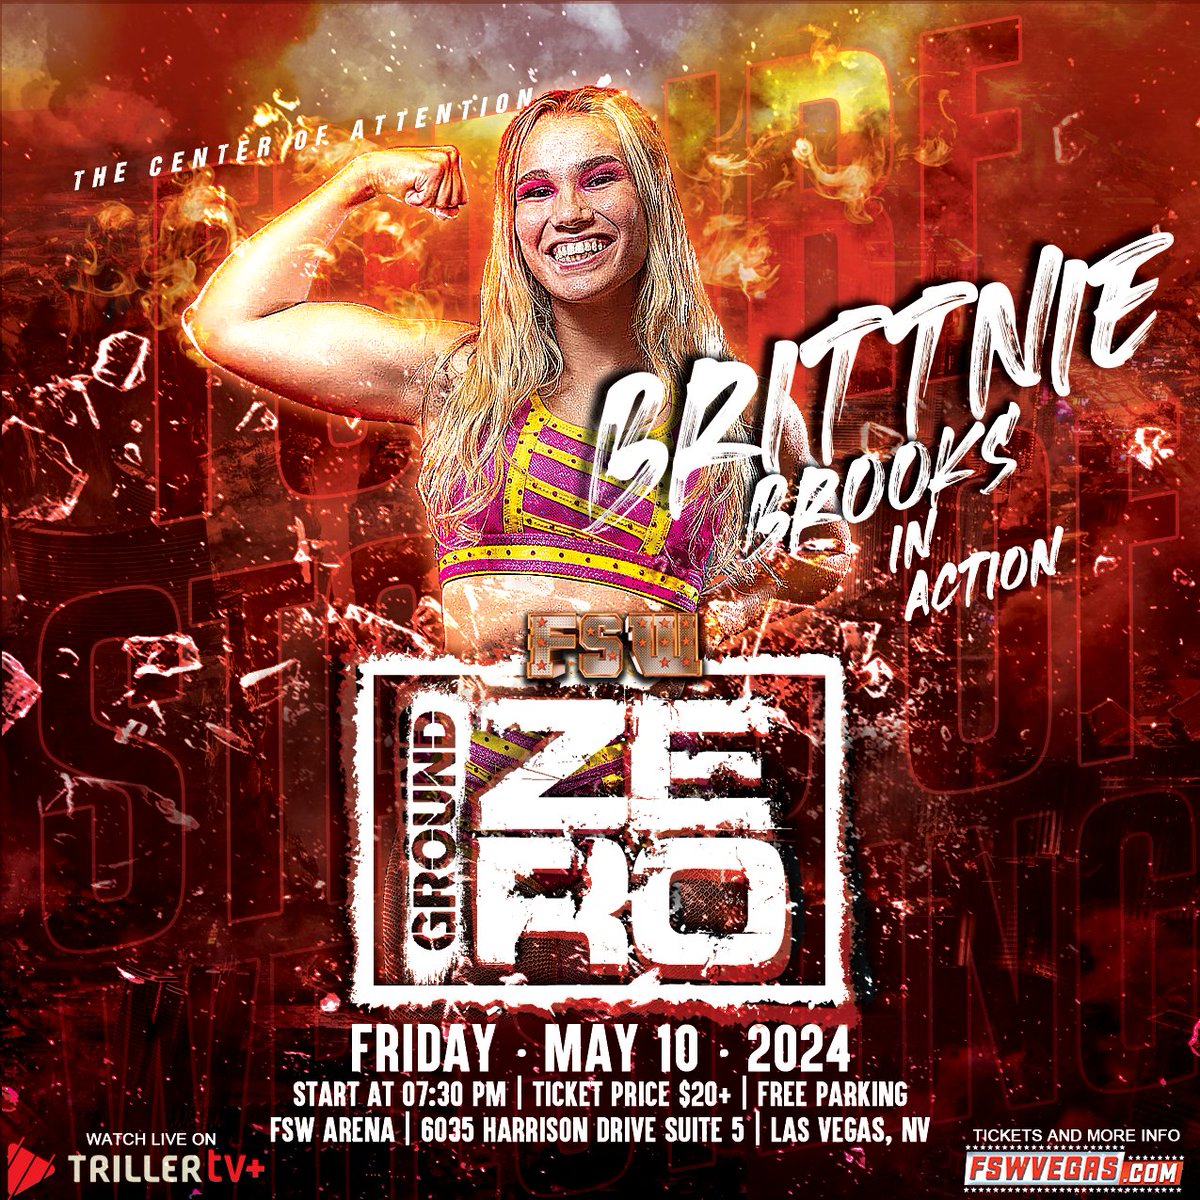 .@BrittnieBrooks isn't finished with FSW Women's Champion @RachelleRiveter! Catch them both THIS FRIDAY at the FSW Arena for Ground Zero! FSW Ground Zero This Friday May 10, 7:30PM LIVE on @FiteTV+ FSW Arena, #LasVegas Ticket + Streaming links in the bio!